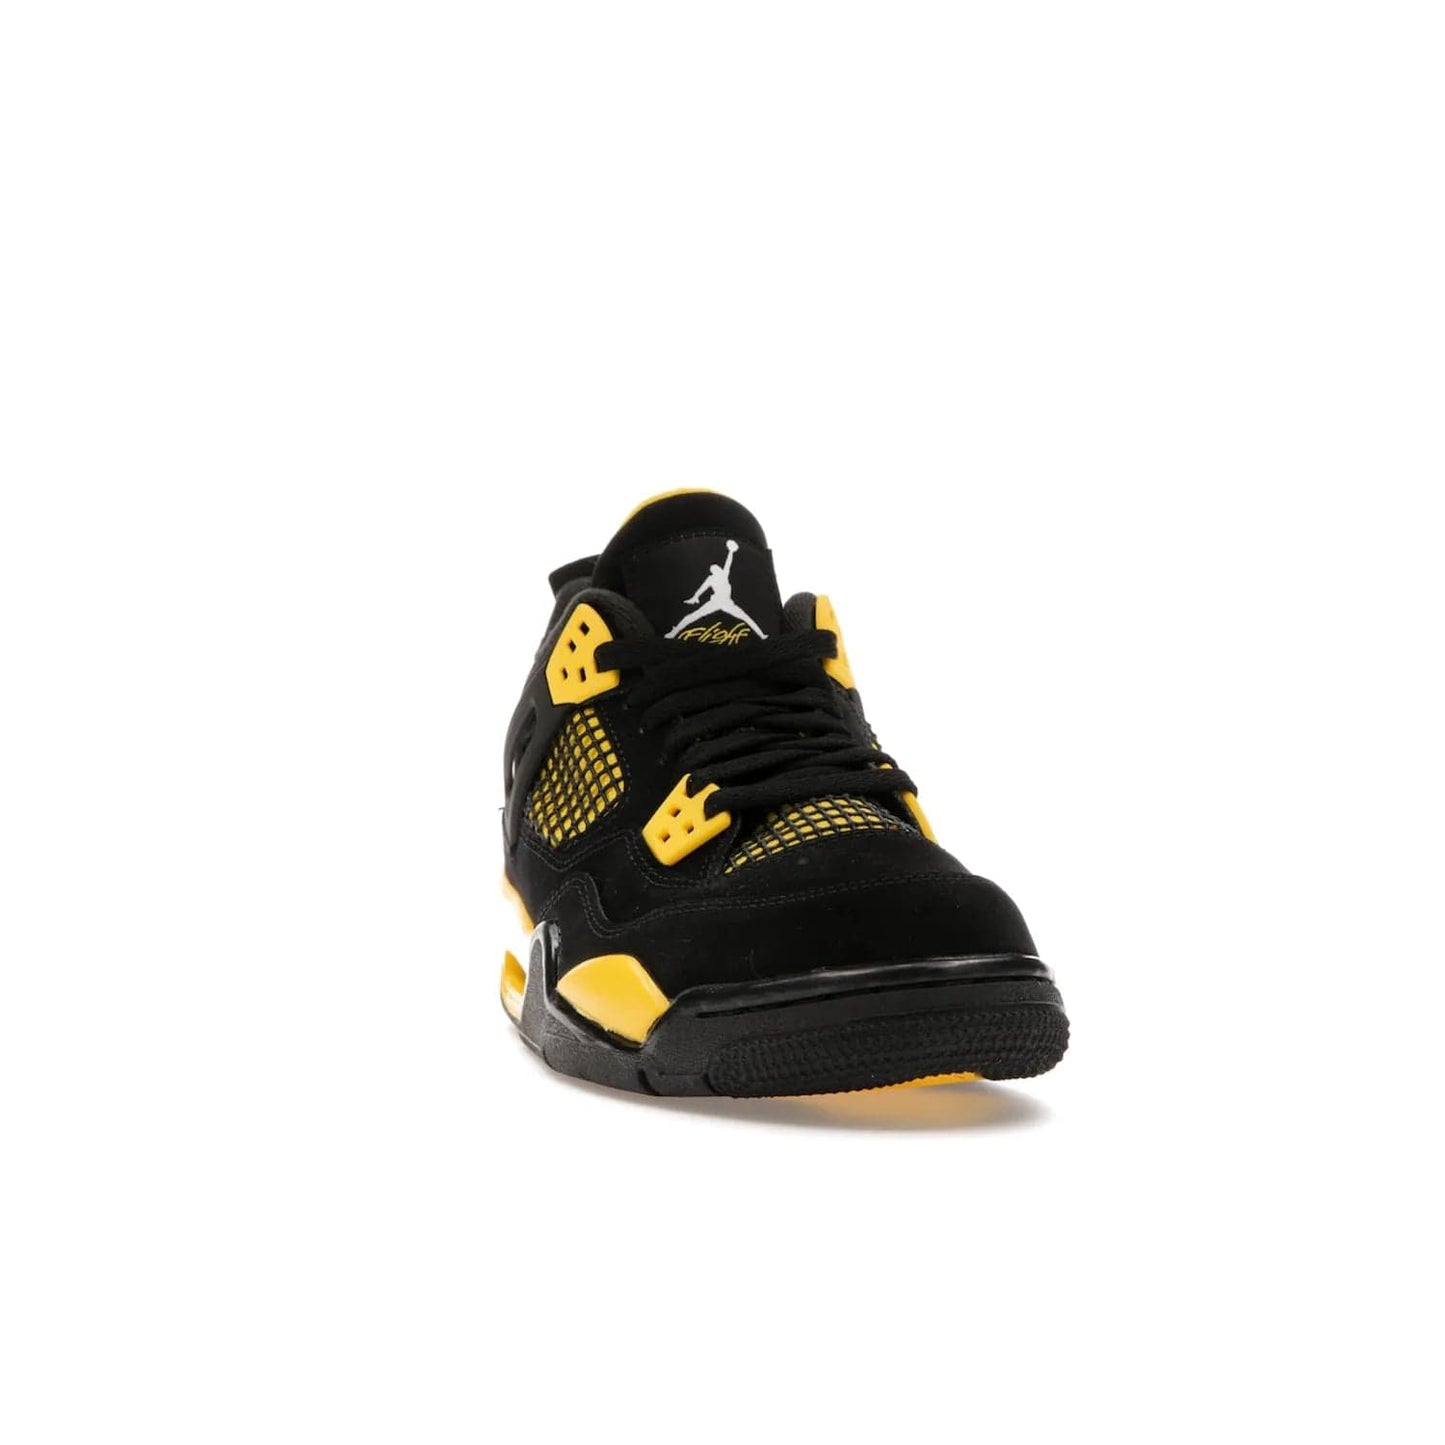 Jordan 4 Retro Thunder (2023) (GS) - Image 8 - Only at www.BallersClubKickz.com - Introducing the iconic Jordan 4 Retro Thunder from the 2023 collection! Sleek black and Tour Yellow detailing. Signature Jordan tongue tab. Mesmerizing design for sneaker collectors. Get yours now!